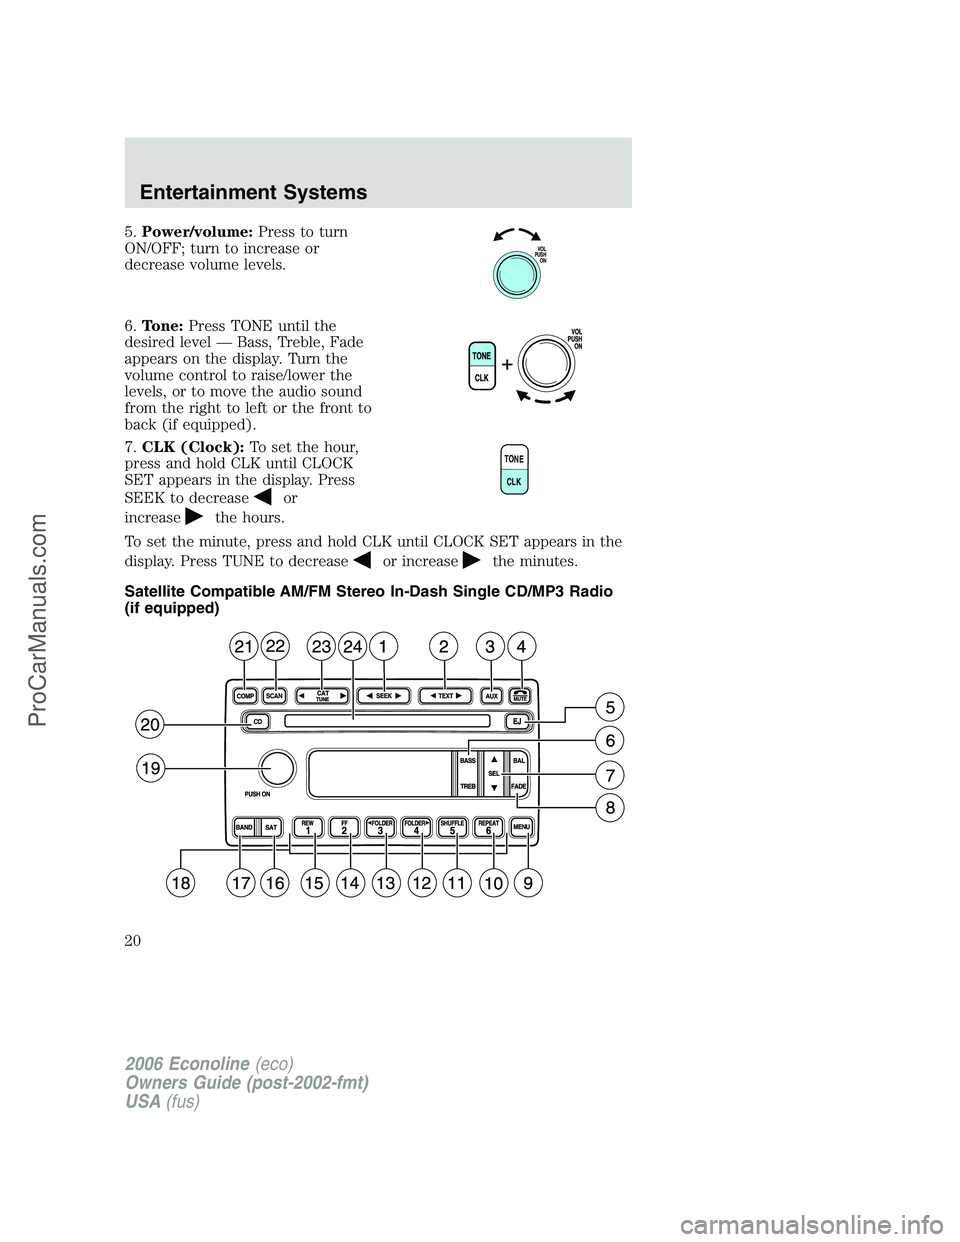 FORD E-350 2006  Owners Manual 5.Power/volume:Press to turn
ON/OFF; turn to increase or
decrease volume levels.
6.Tone:Press TONE until the
desired level — Bass, Treble, Fade
appears on the display. Turn the
volume control to rai